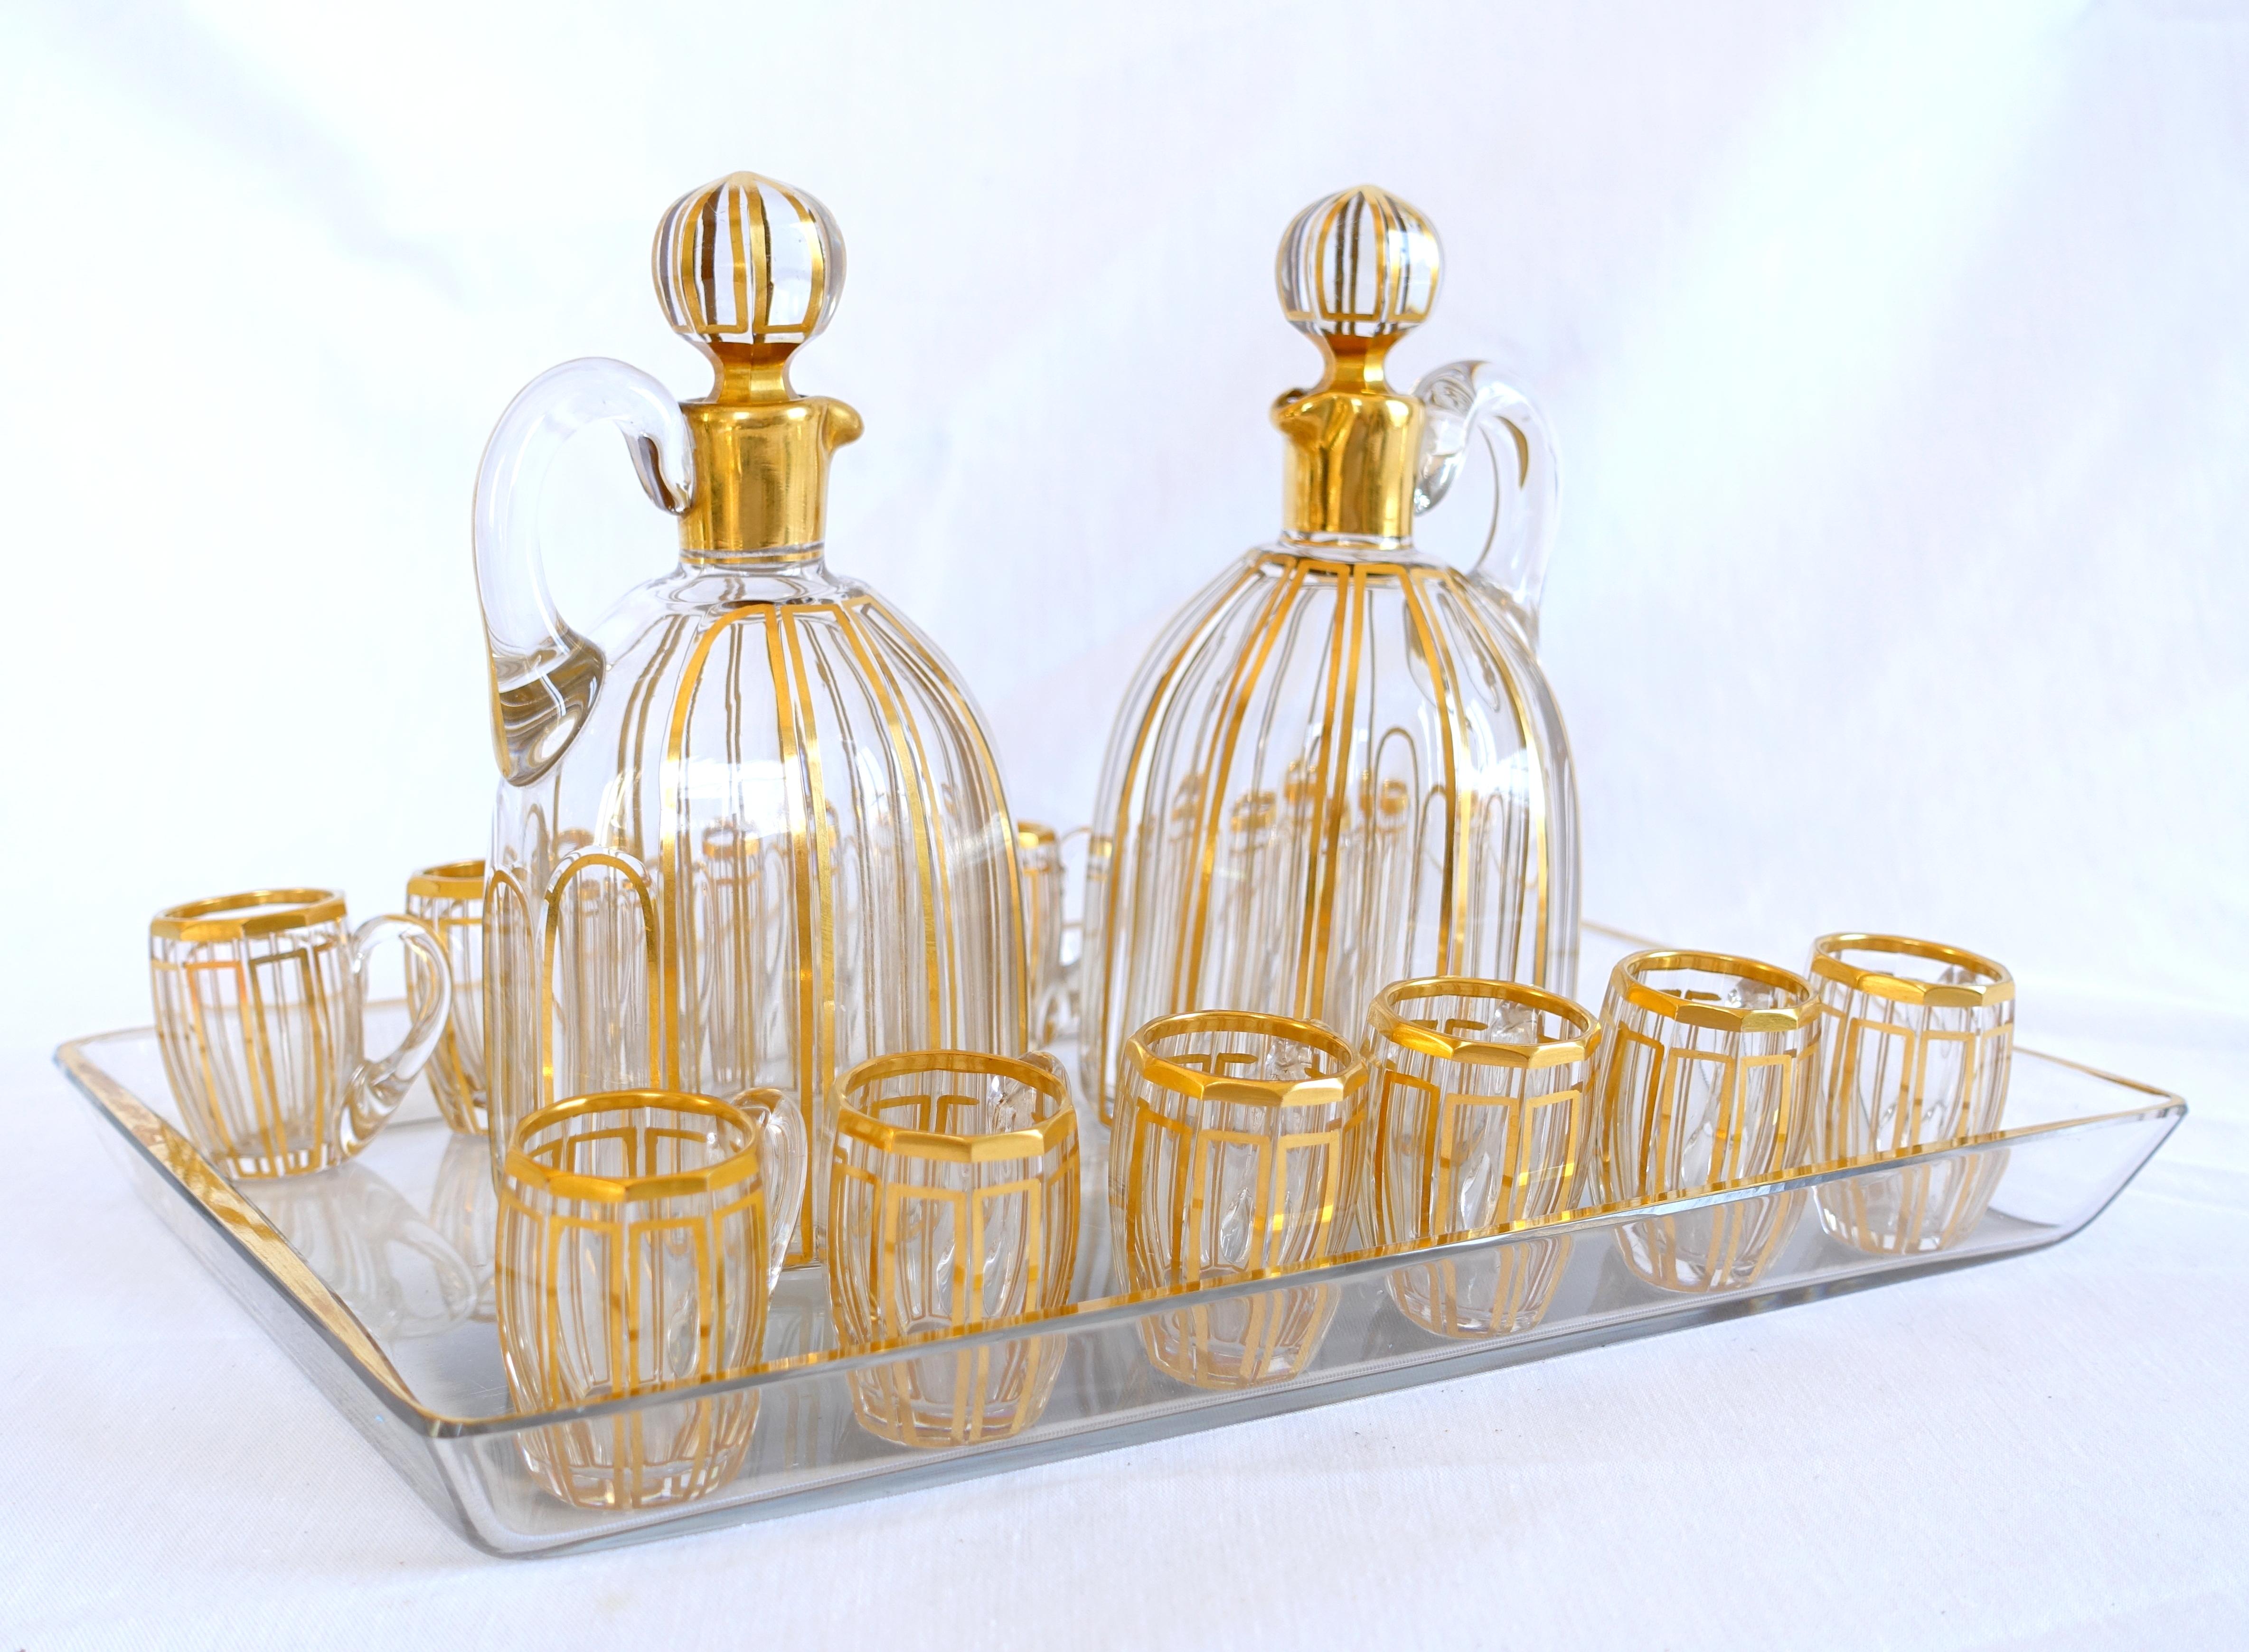 Louis XVI Baccarat crystal liquor set for 12, Cannelures cut pattern enhanced with gold